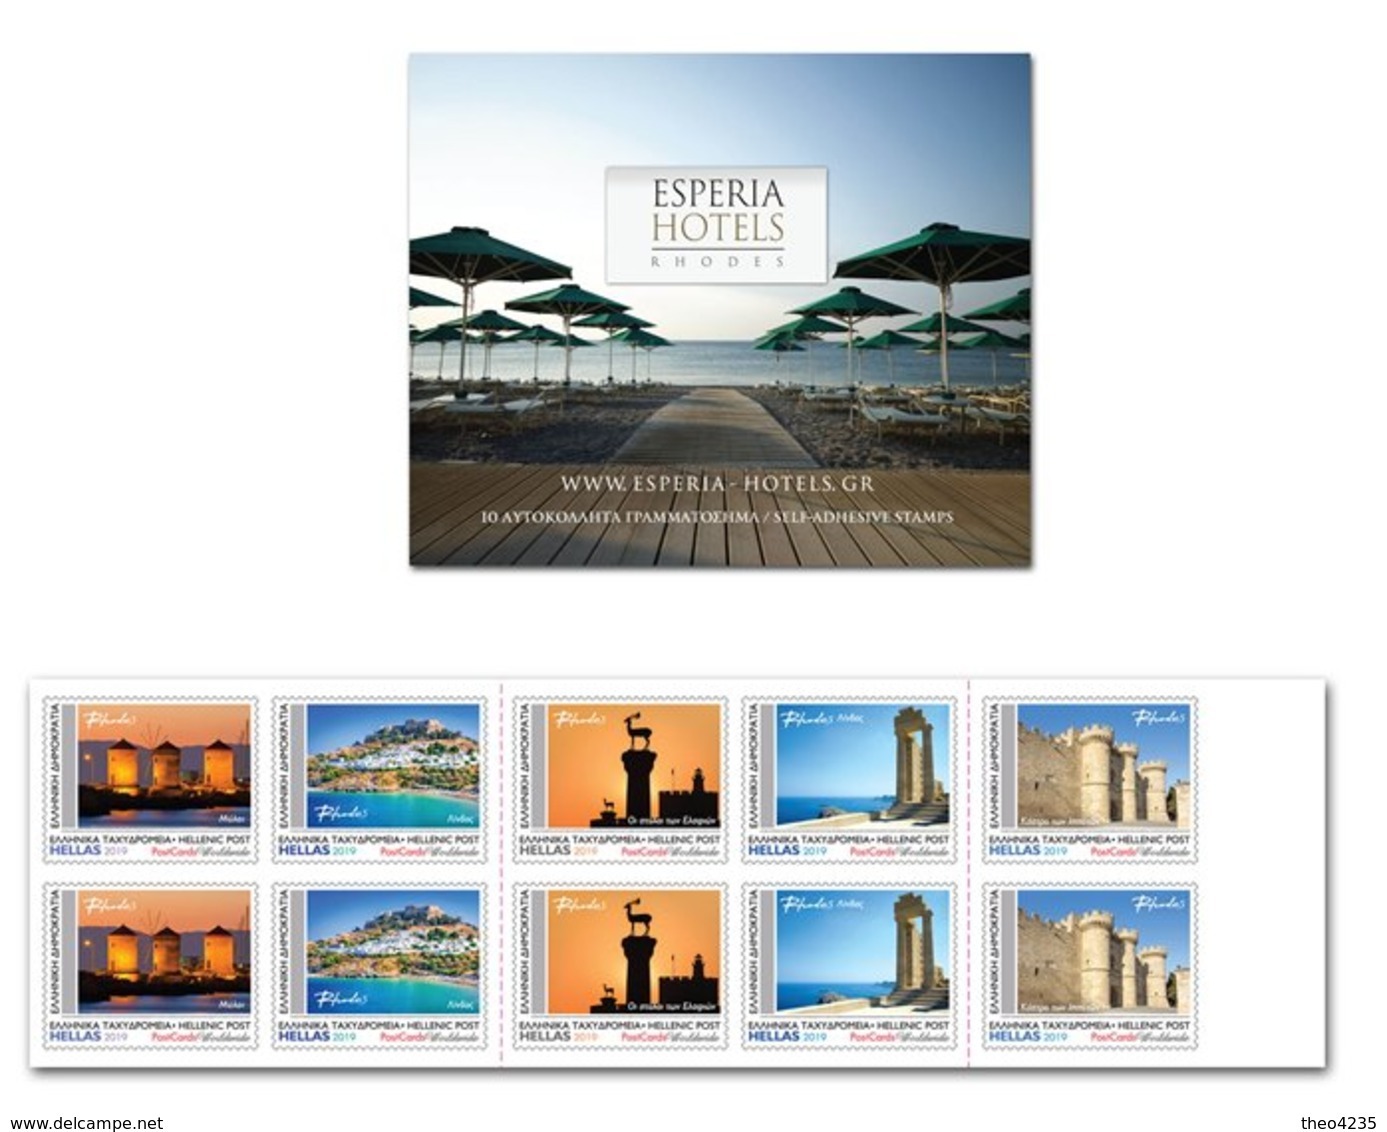 GREECE STAMPS 2019/ESPERIA HOTEL RHODOS-SELF ADHESIVE BOOKLET-20/6/19-MNH - Unused Stamps